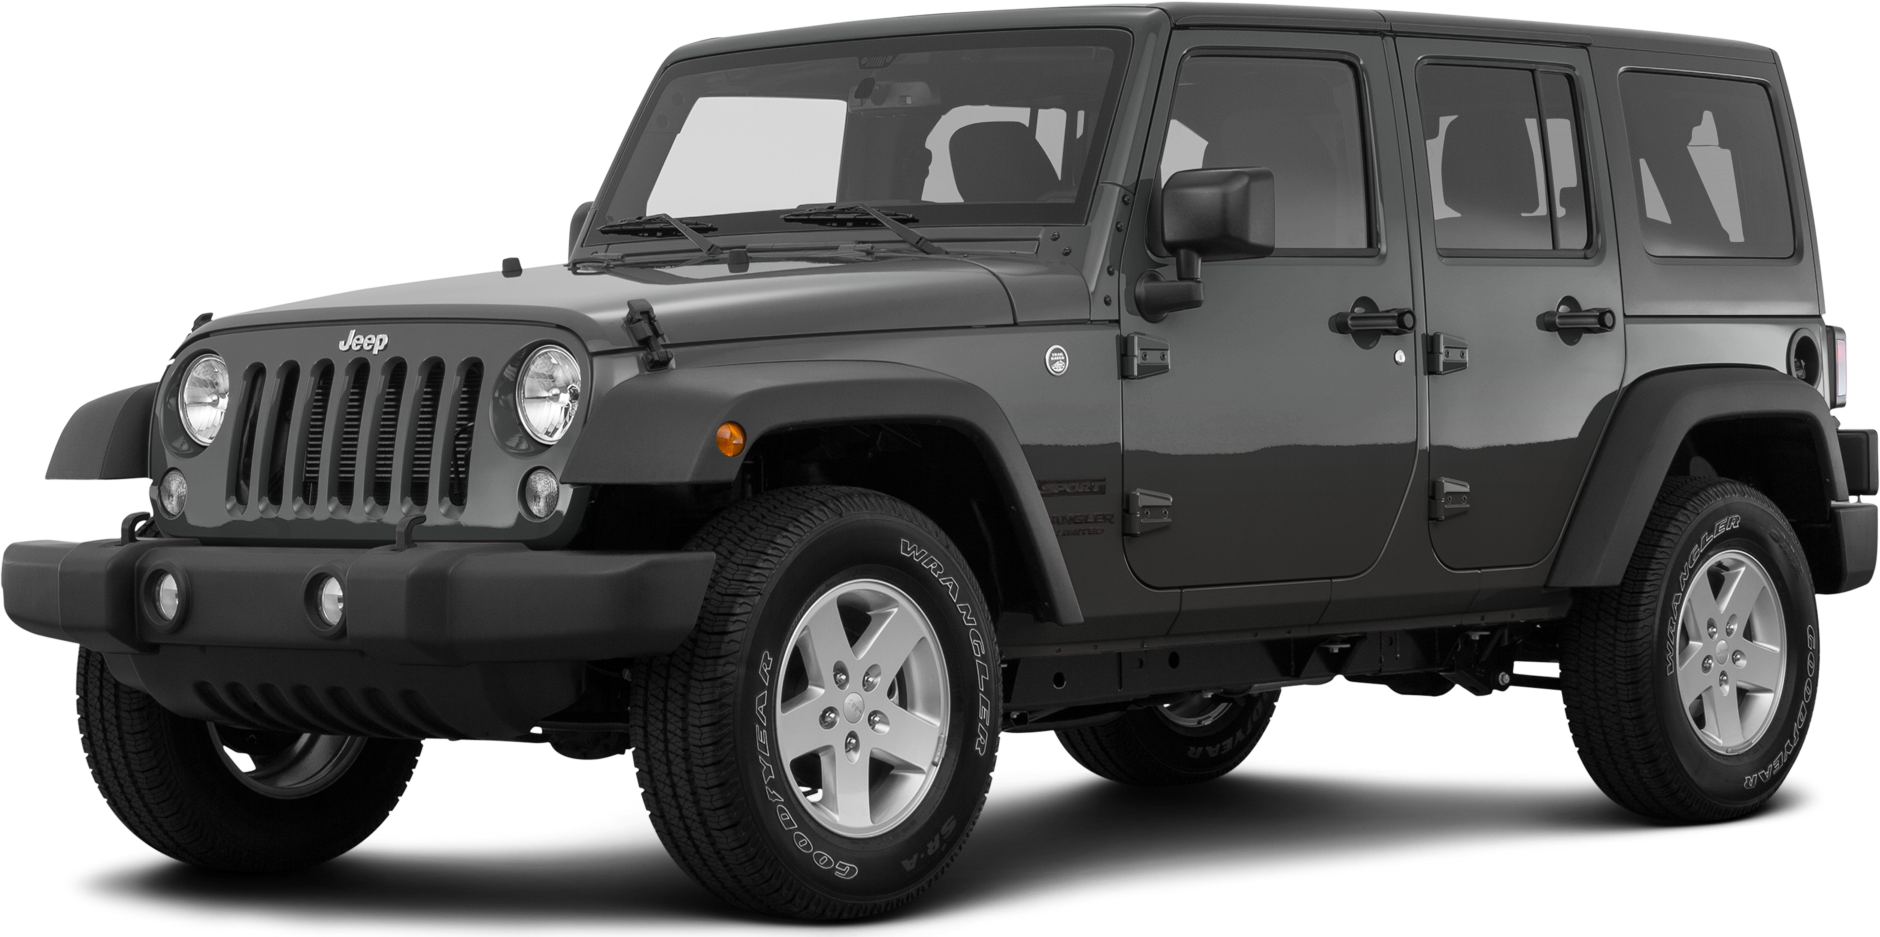 2017-jeep-wrangler-unlimited-price-kbb-value-cars-for-sale-kelley